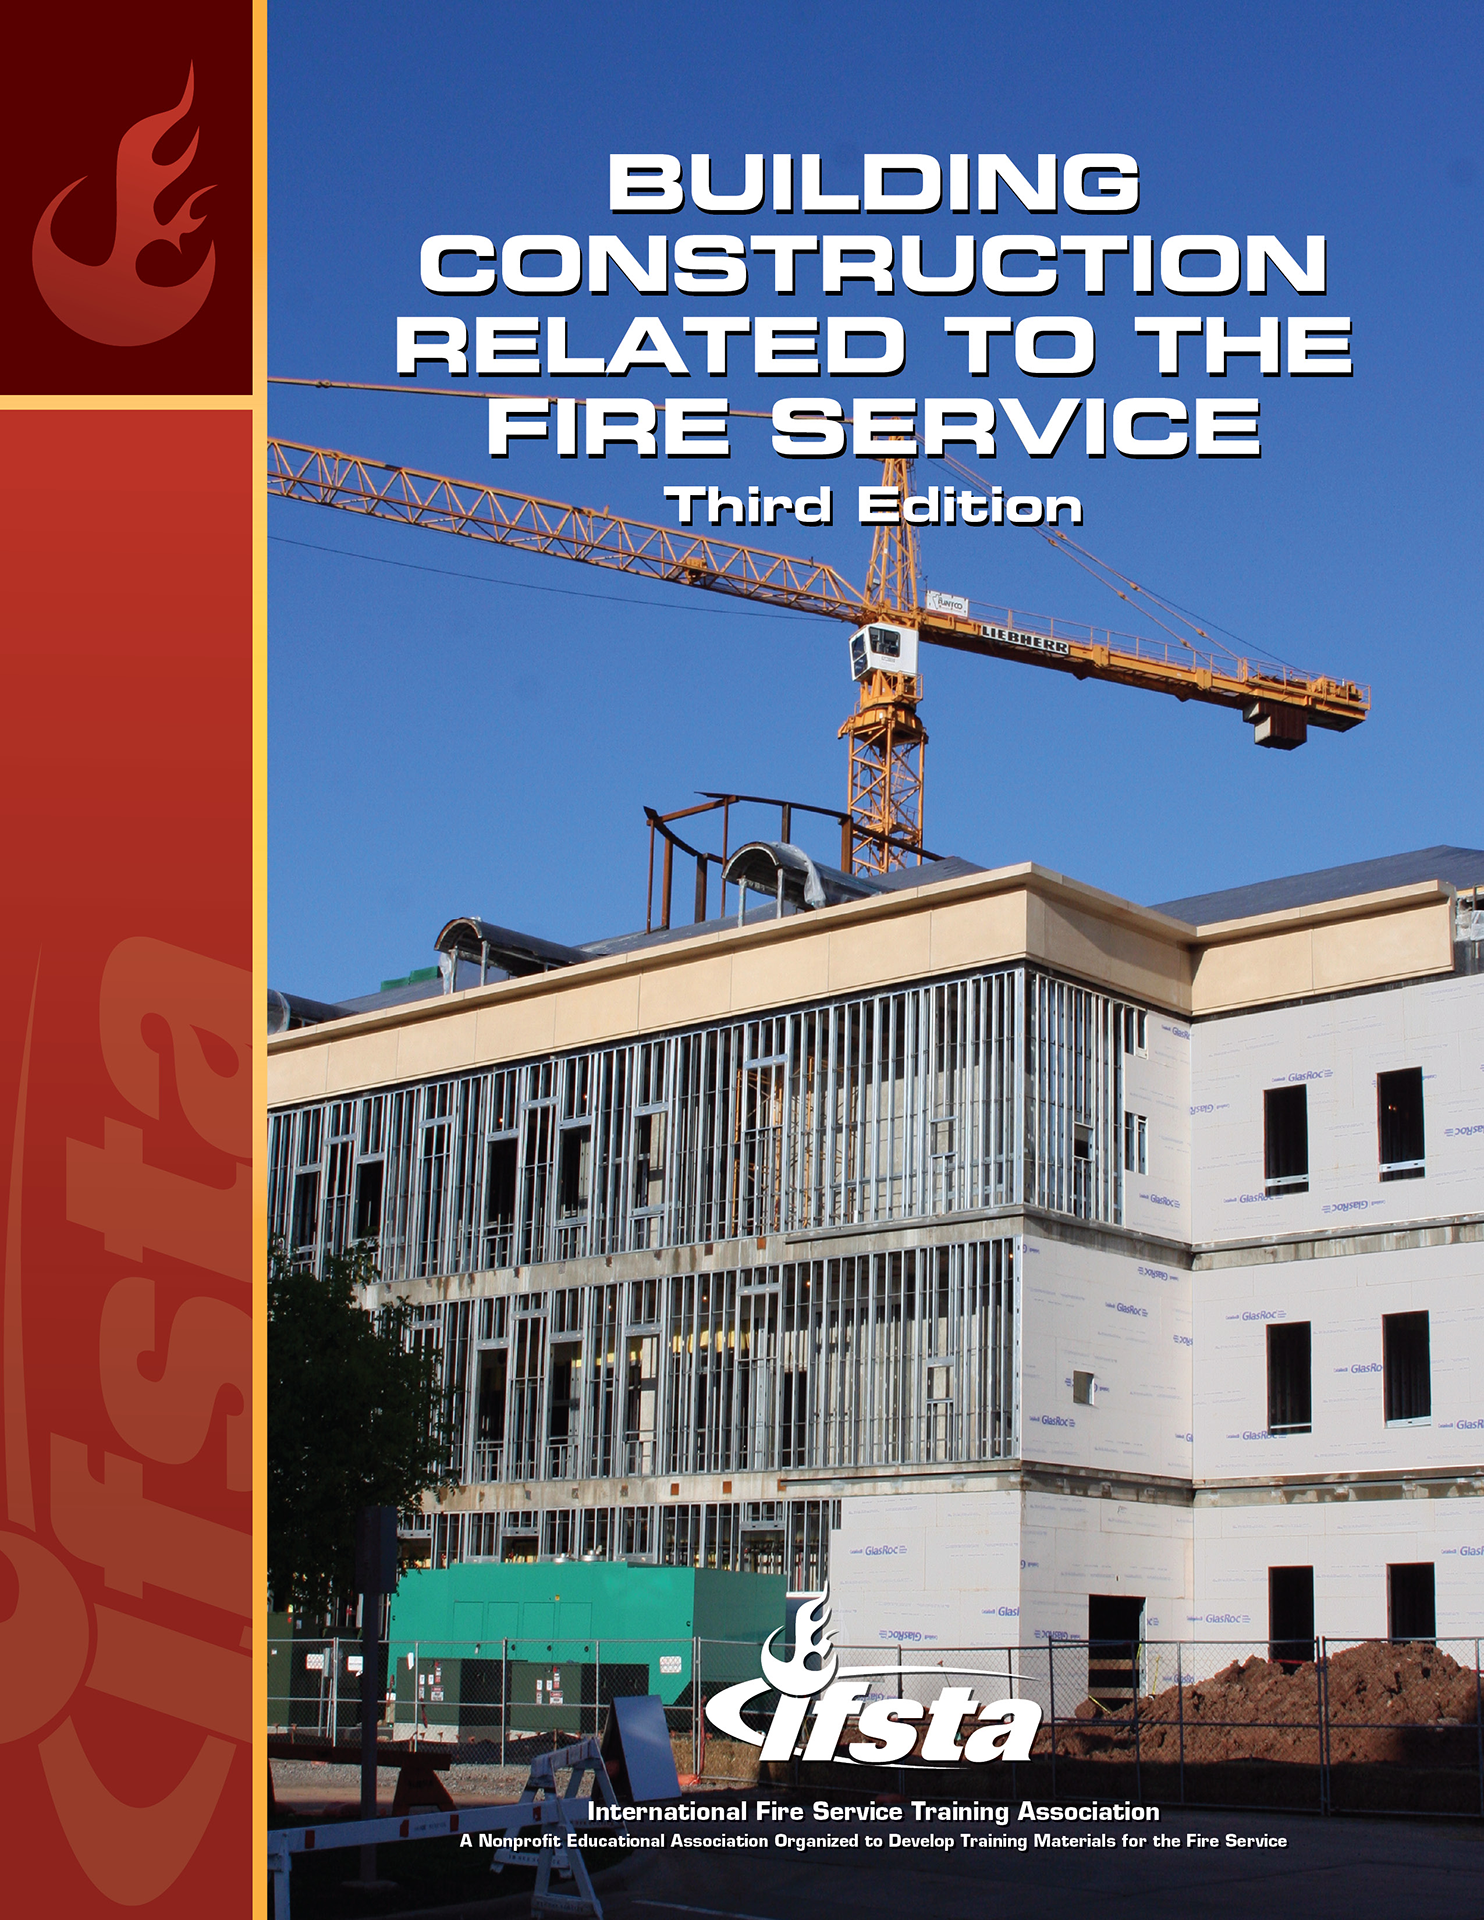 Building Construction Related to the Fire Service, 2nd Edition